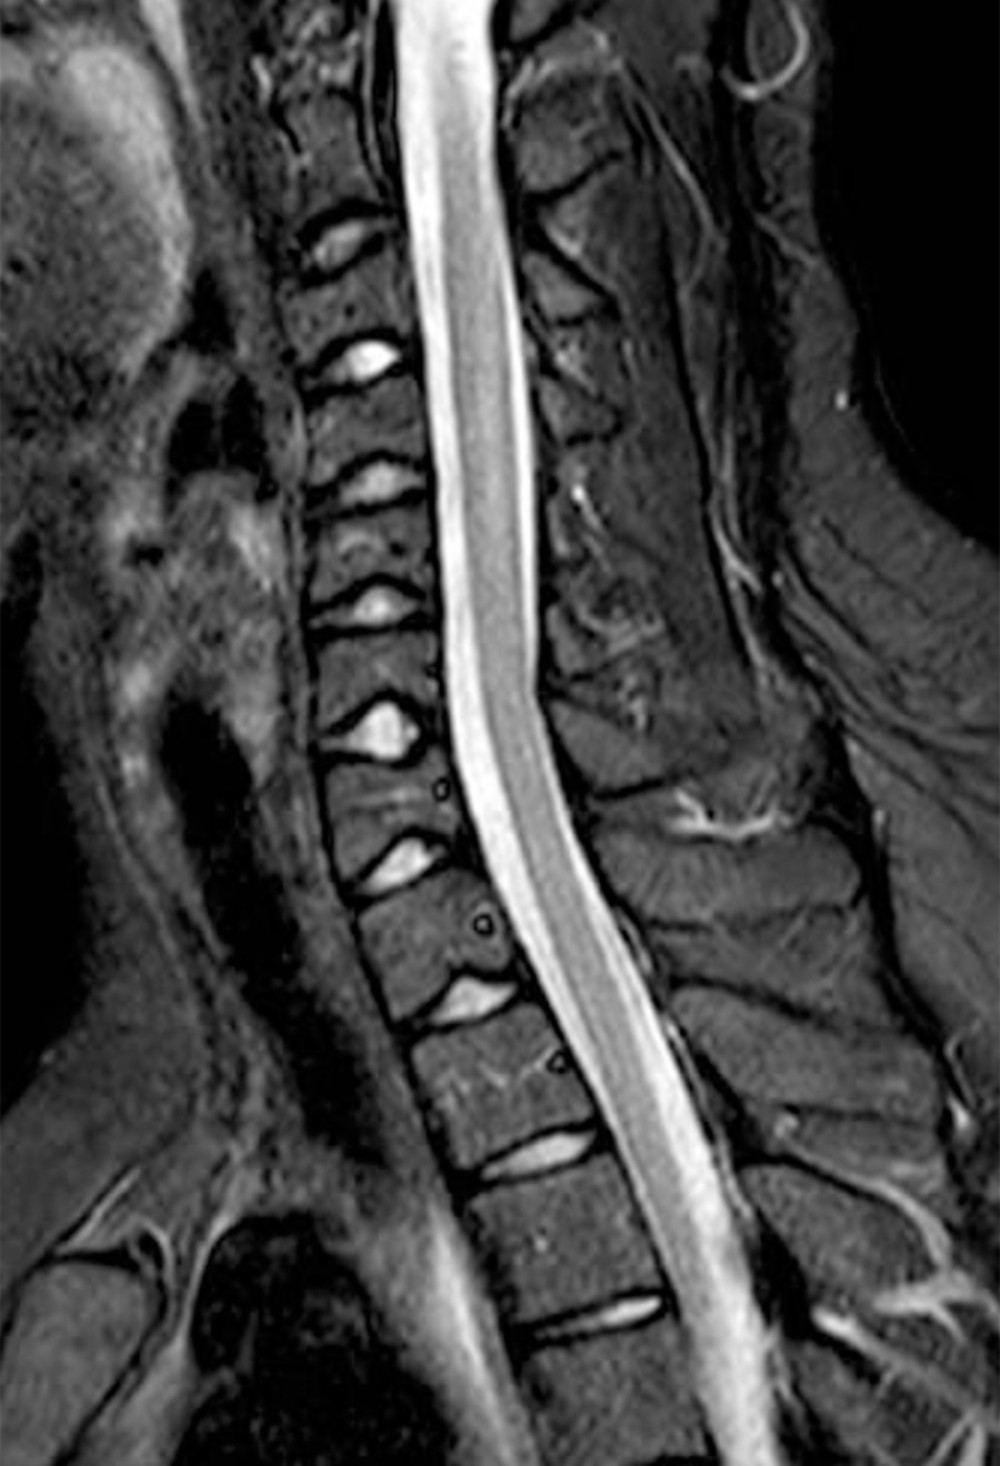 Magnetic resonance imaging (MRI) scan of the cervical column. The MRI did not reveal any definite pathological findings.